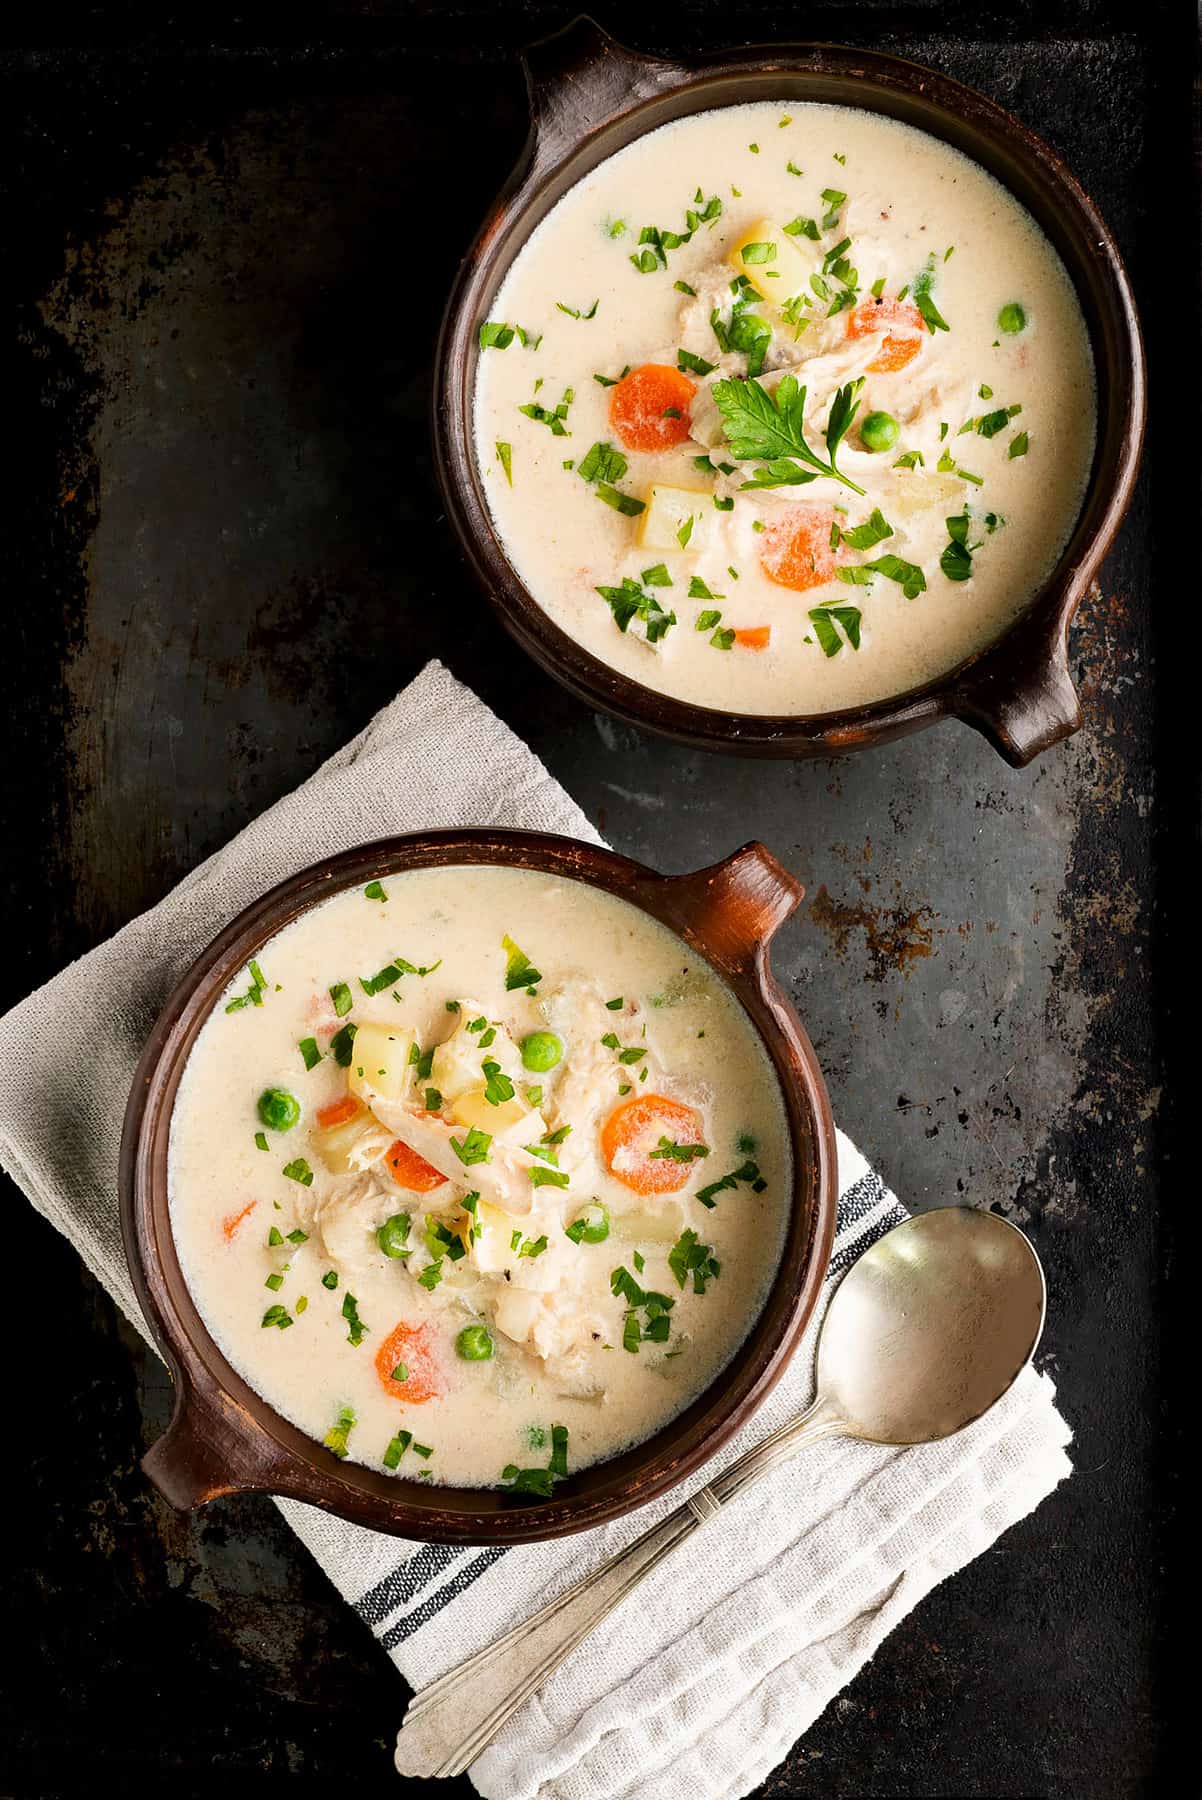 Creamy chicken and vegetable soup.